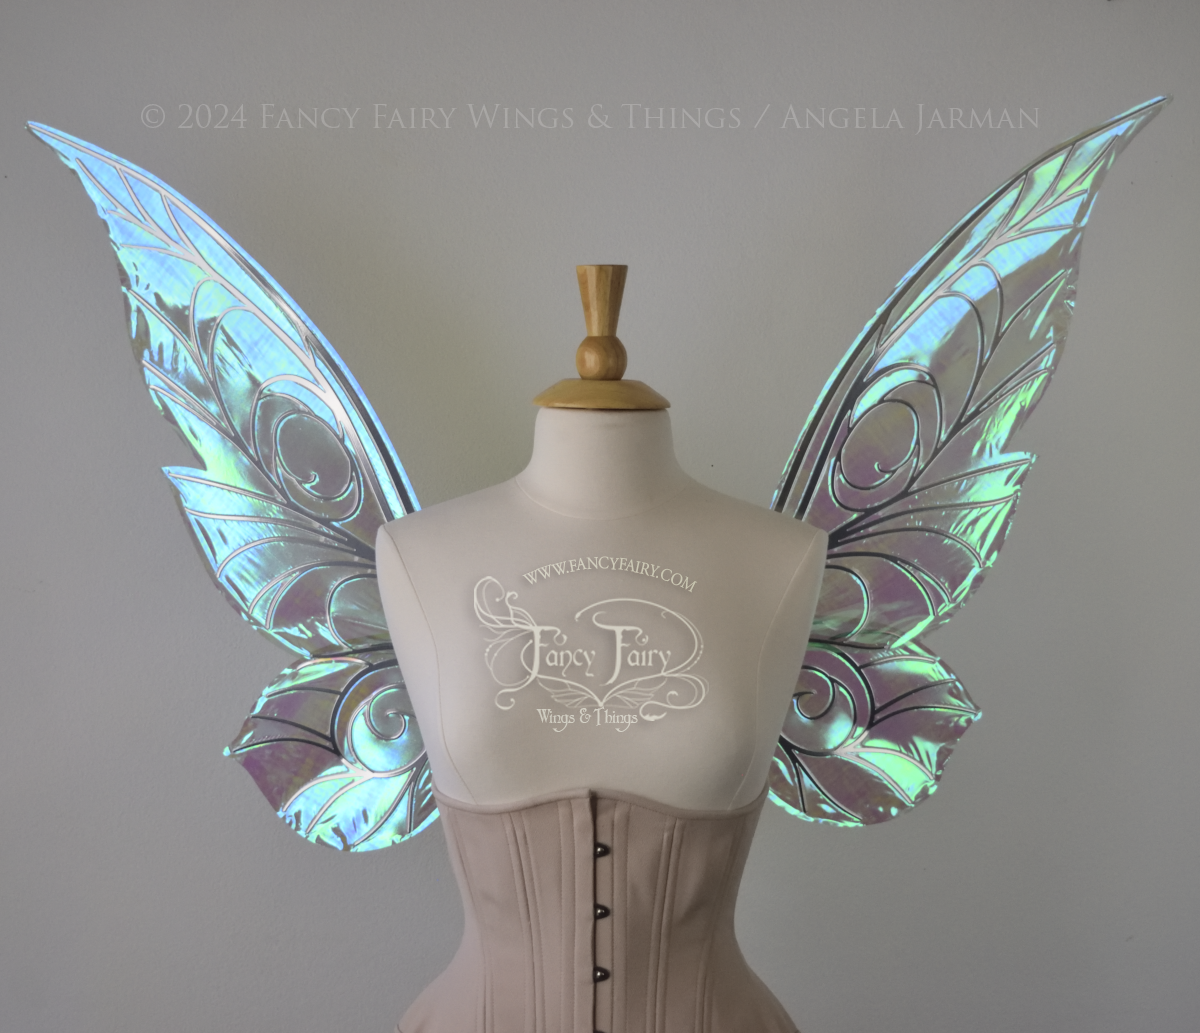 Front view of green iridescent Tinker Bell inspired fairy wings with swirly silver veins, displayed on a dress form